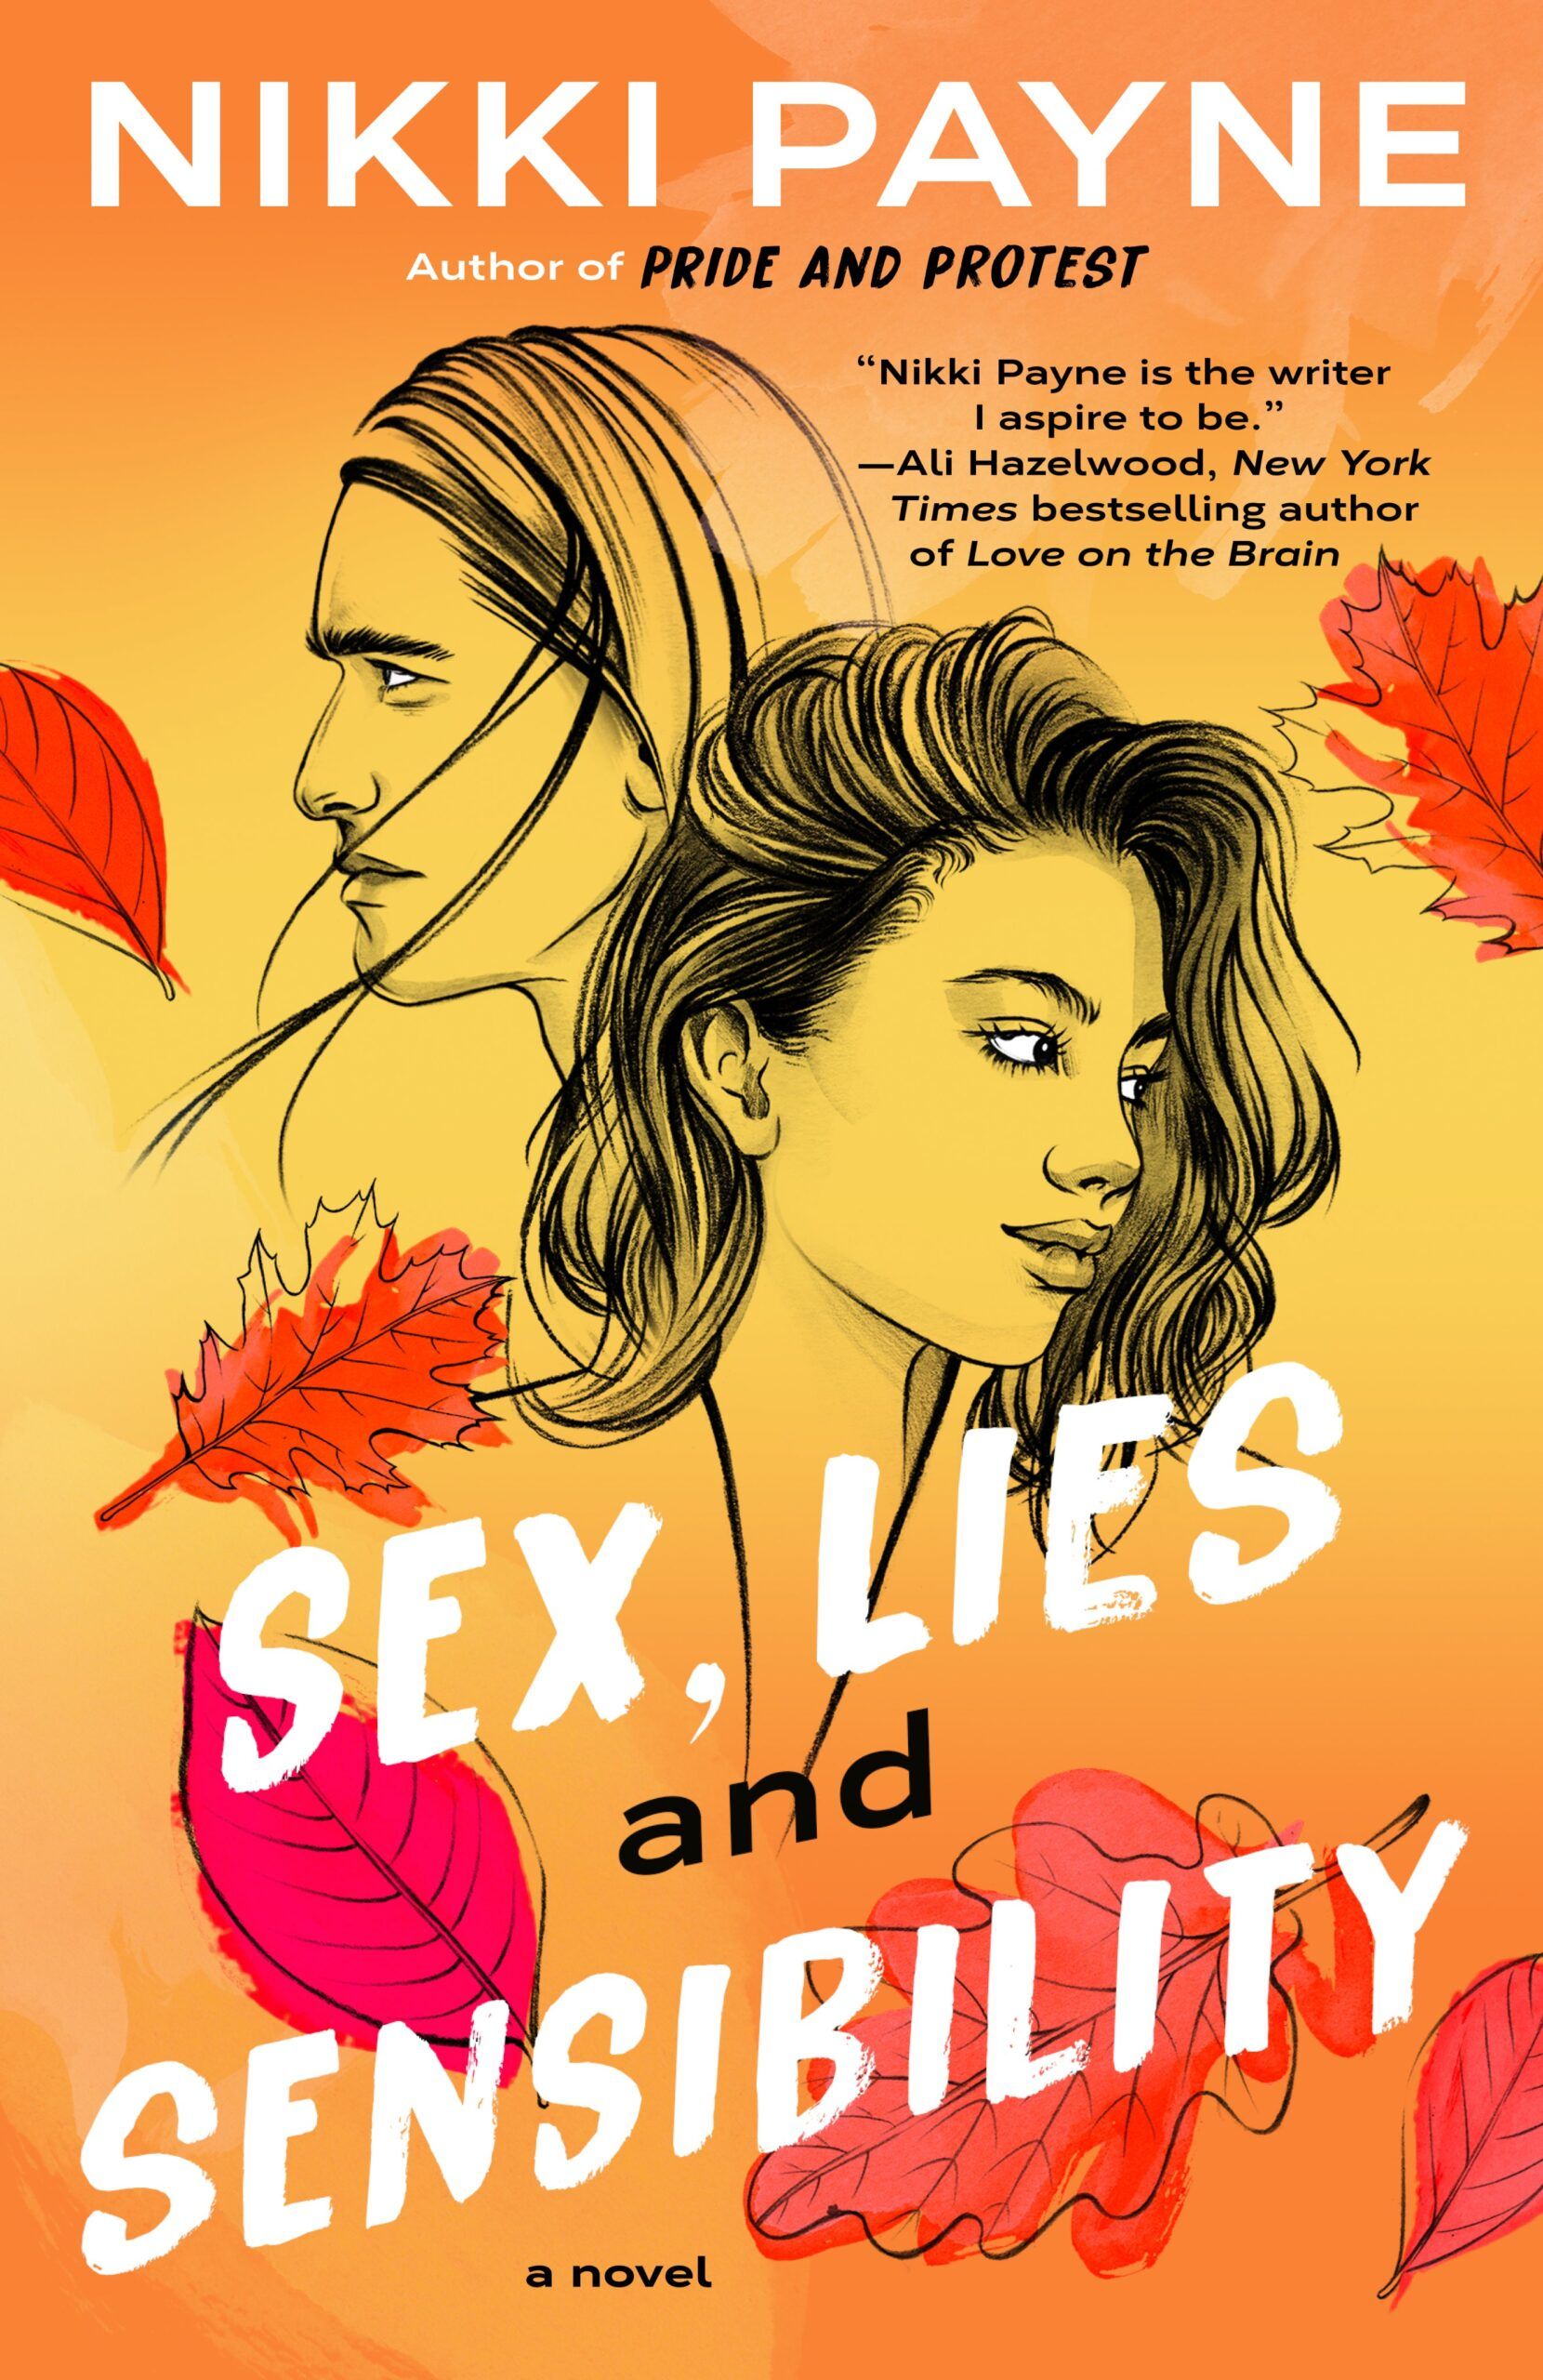 Cover of Sex, Lies, and Sensibility by Nikki Payne